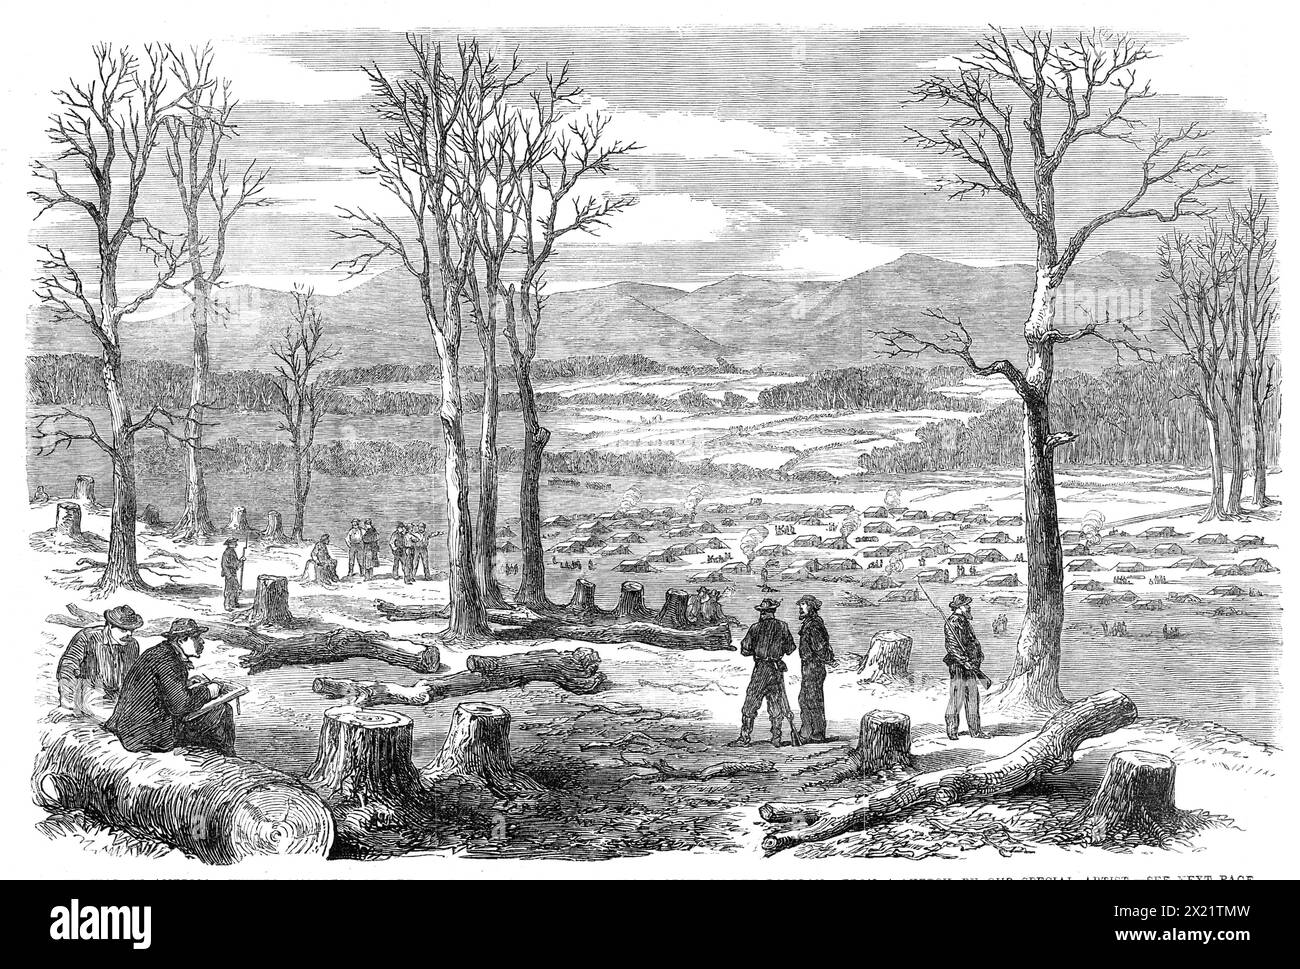 The War in America: winter quarters of the left wing of the Confederate Army on the Rapidan - from a sketch by our special artist, 1864. Military camp made up of a '...log and canvas city...There curled the blue smoke from the tent of Robert E. Lee, whose hand I had just shaken, and whose friendship I am proud to own...every soldier of the army of Northern Virginia was a comrade...around me, on every side as far as the eye could reach, lay spread the battle-fields of Virginia; and in many a distant clump of pine wood slept their last sleep those whom I had known in life...Far away in the backg Stock Photo